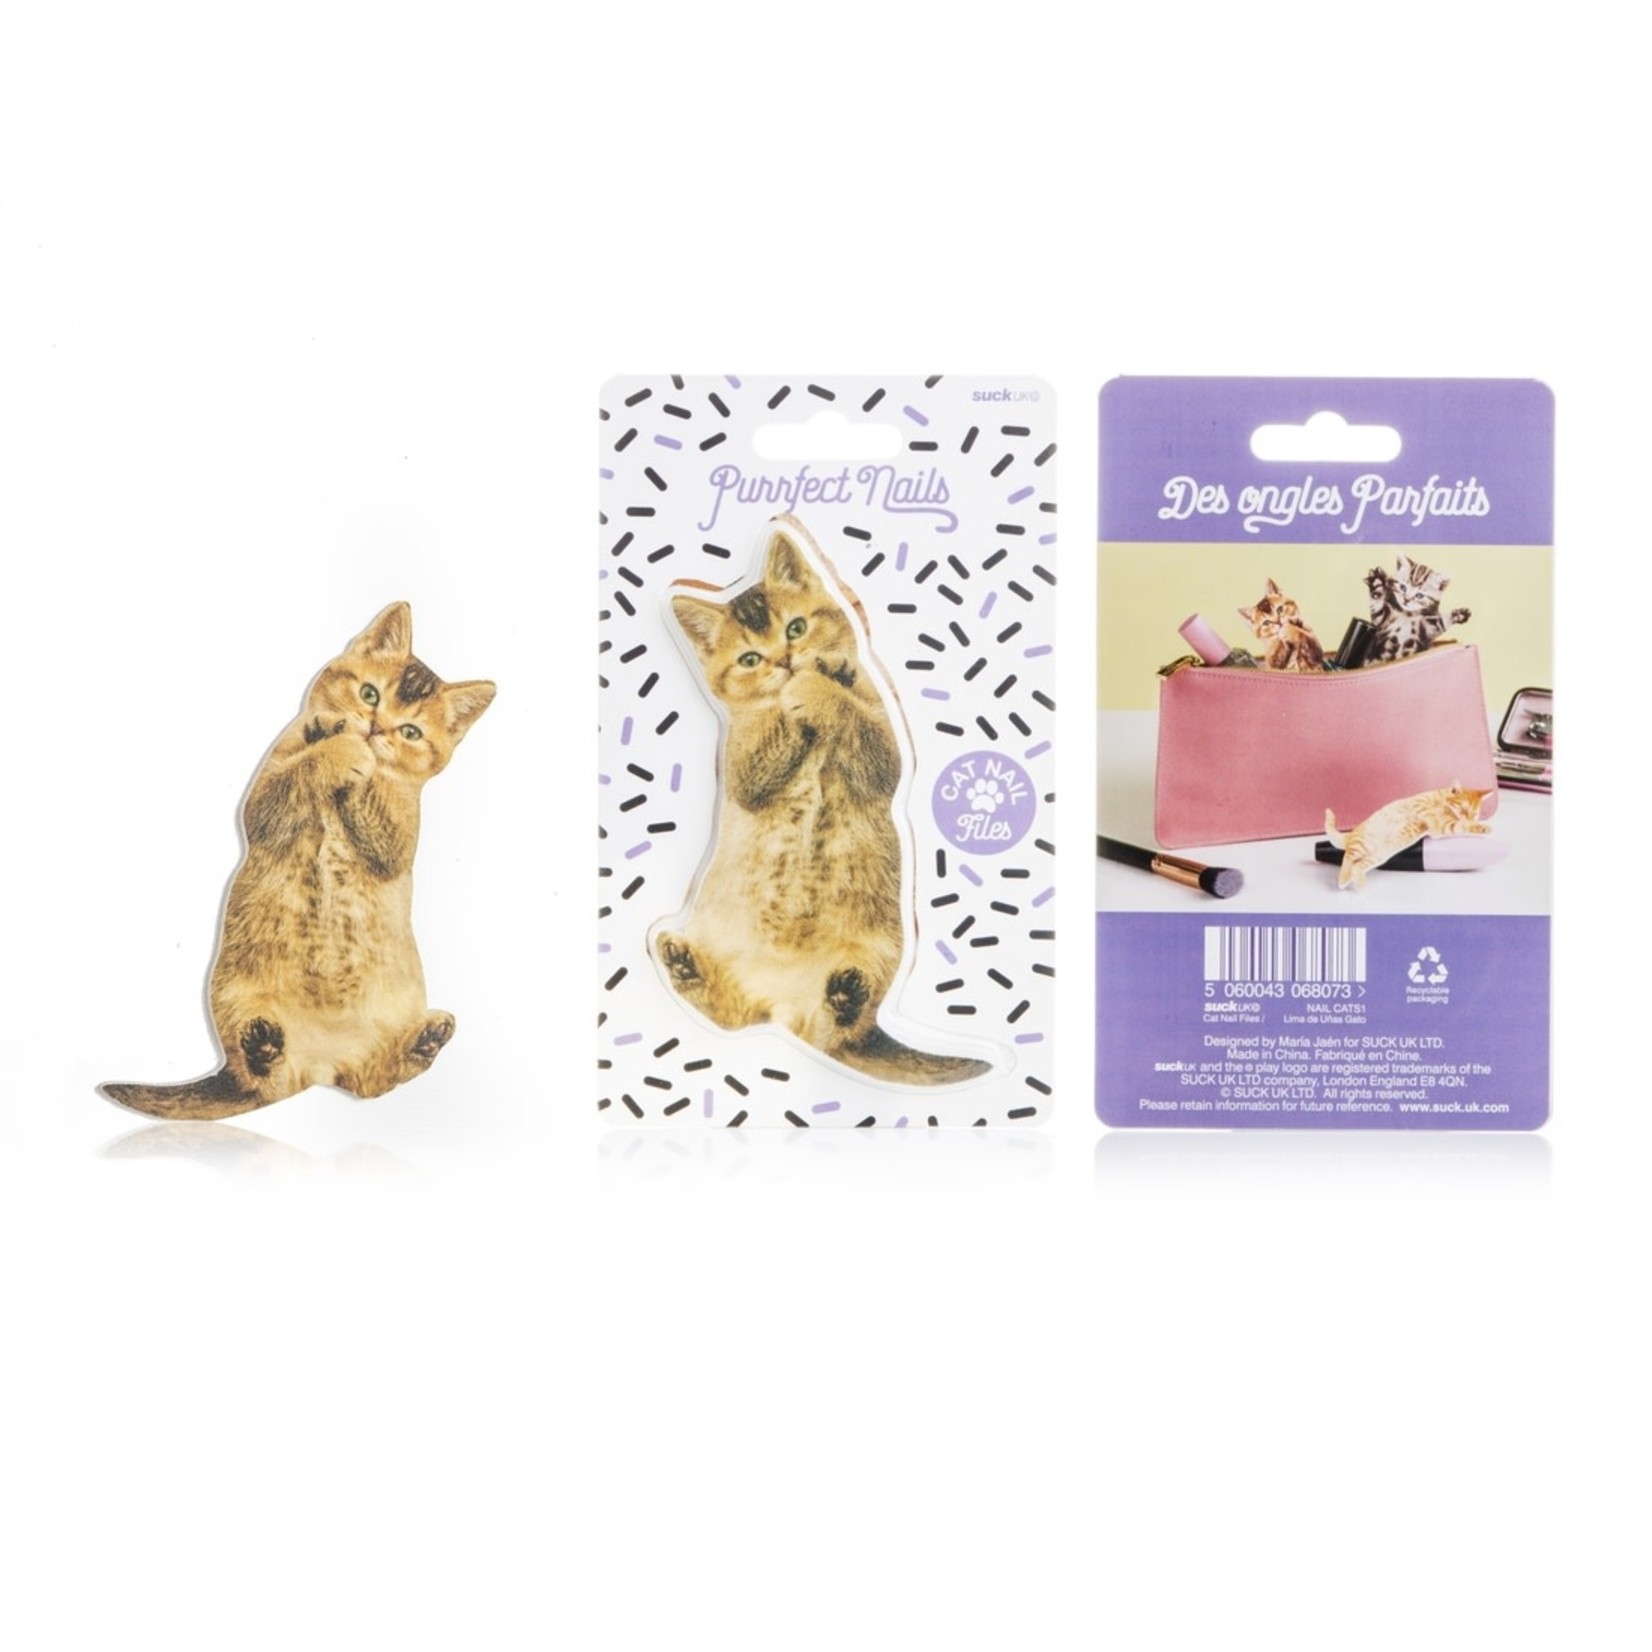 Suck UK Cat Nail Files – Keep Your Nails in Purrrfect Condition